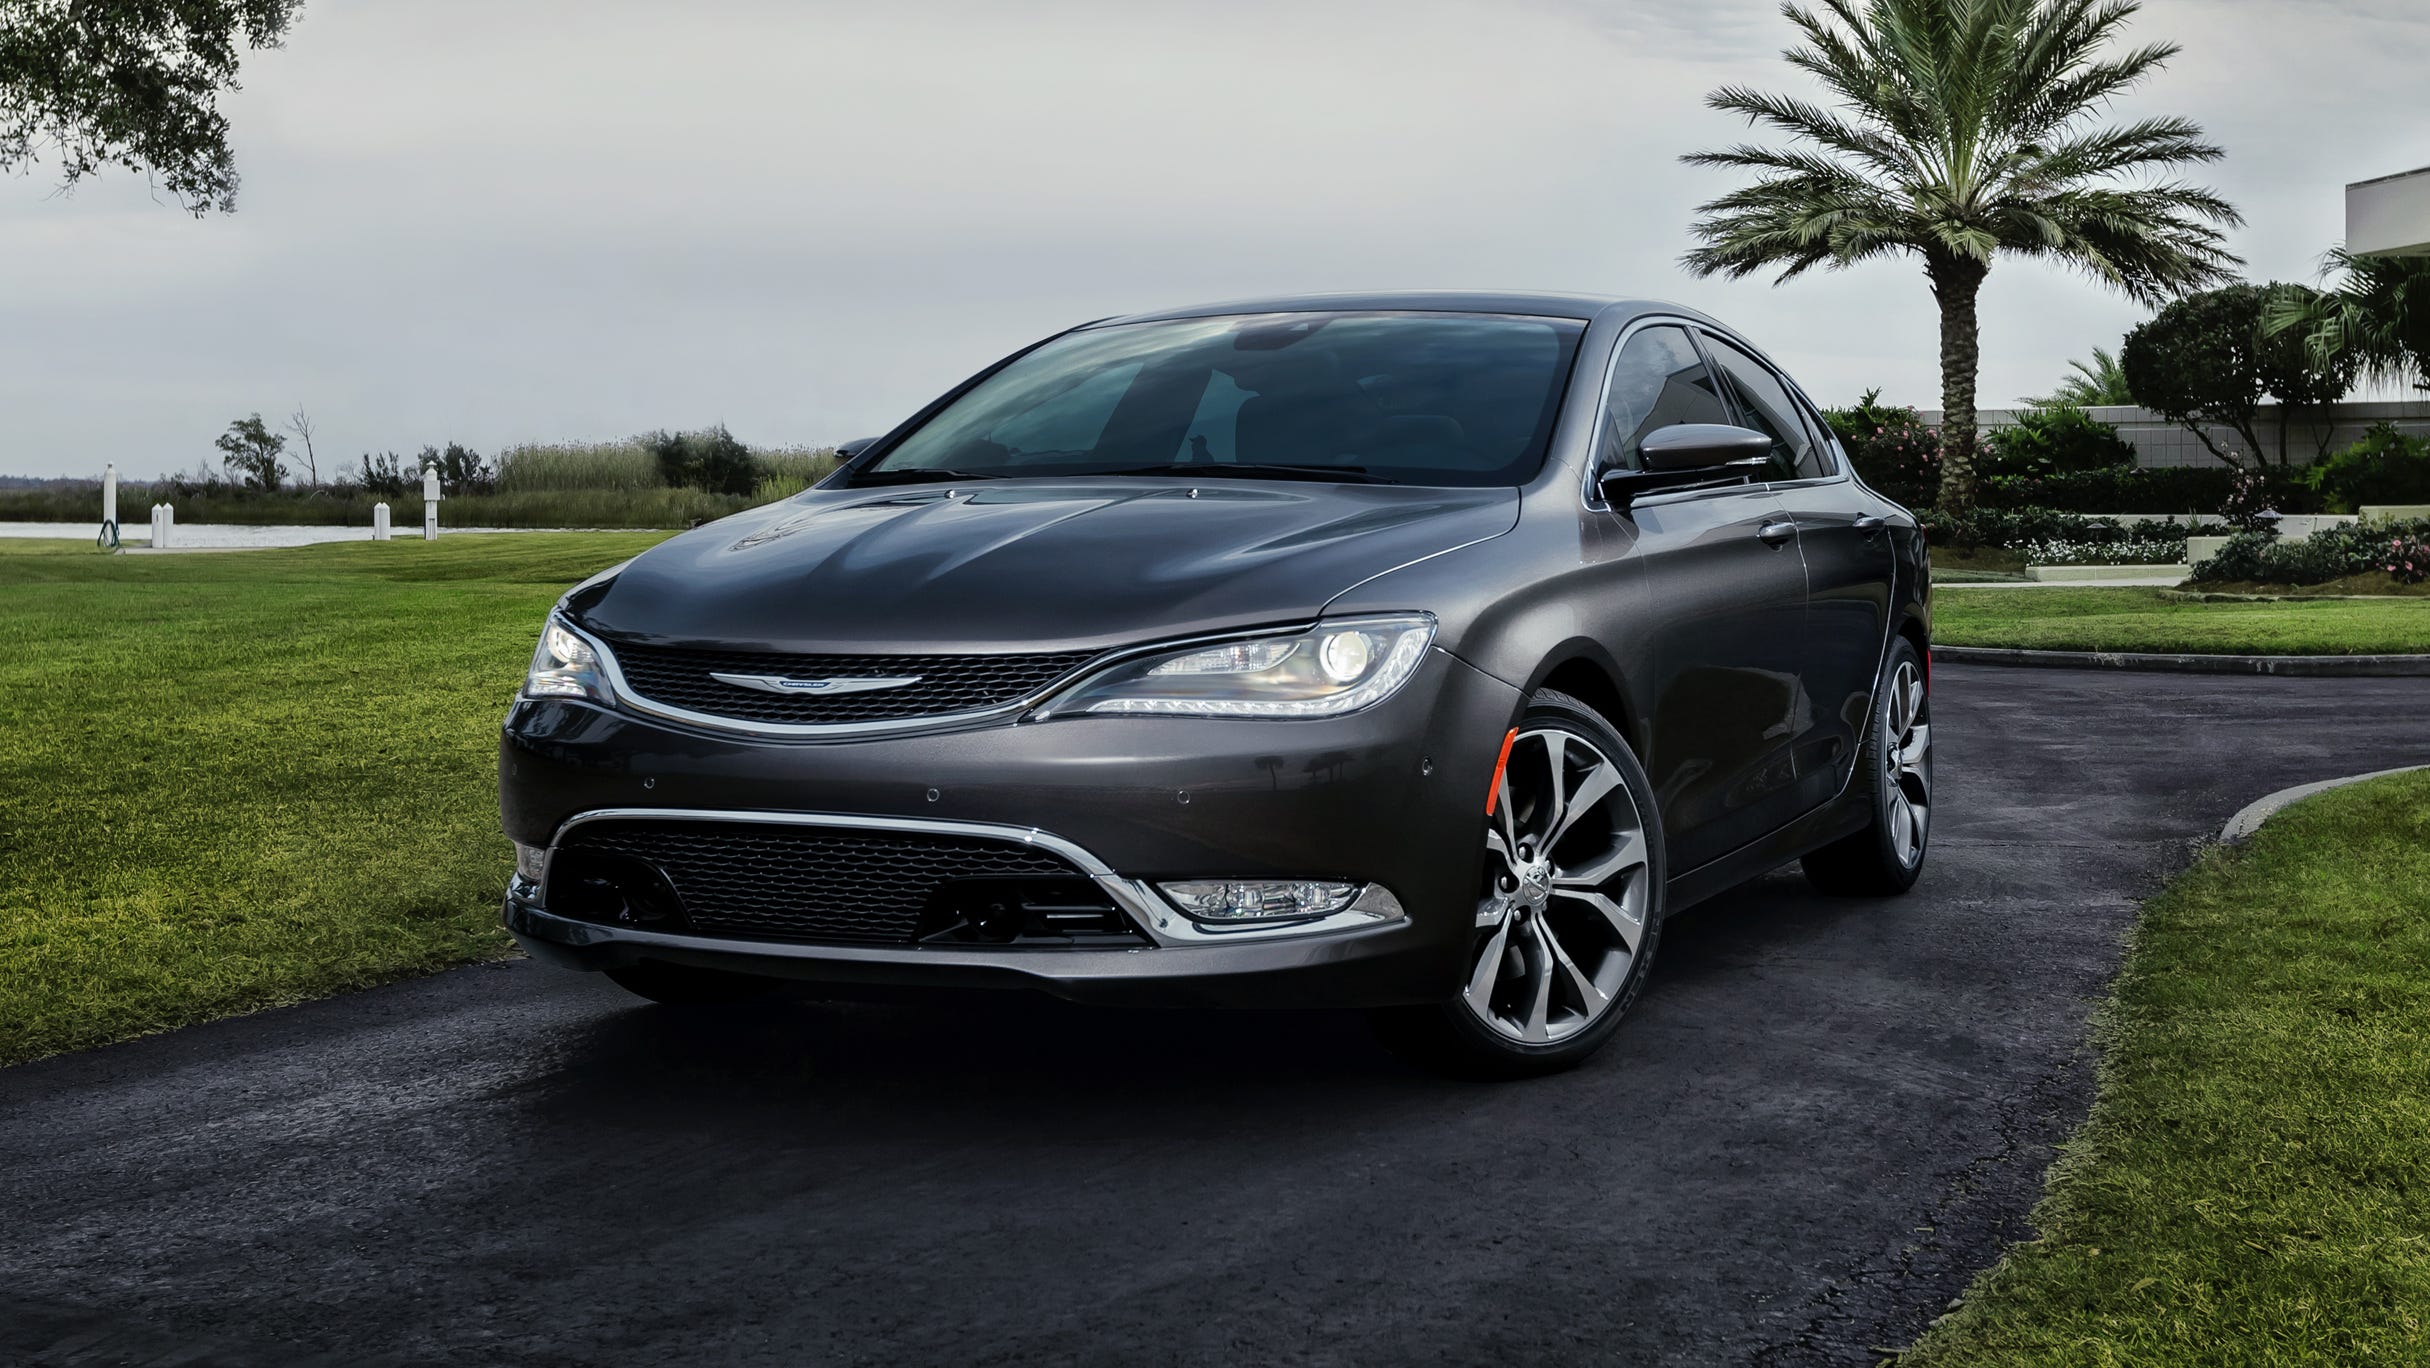 EPA mileage rating puts new Chrysler 200 in the game